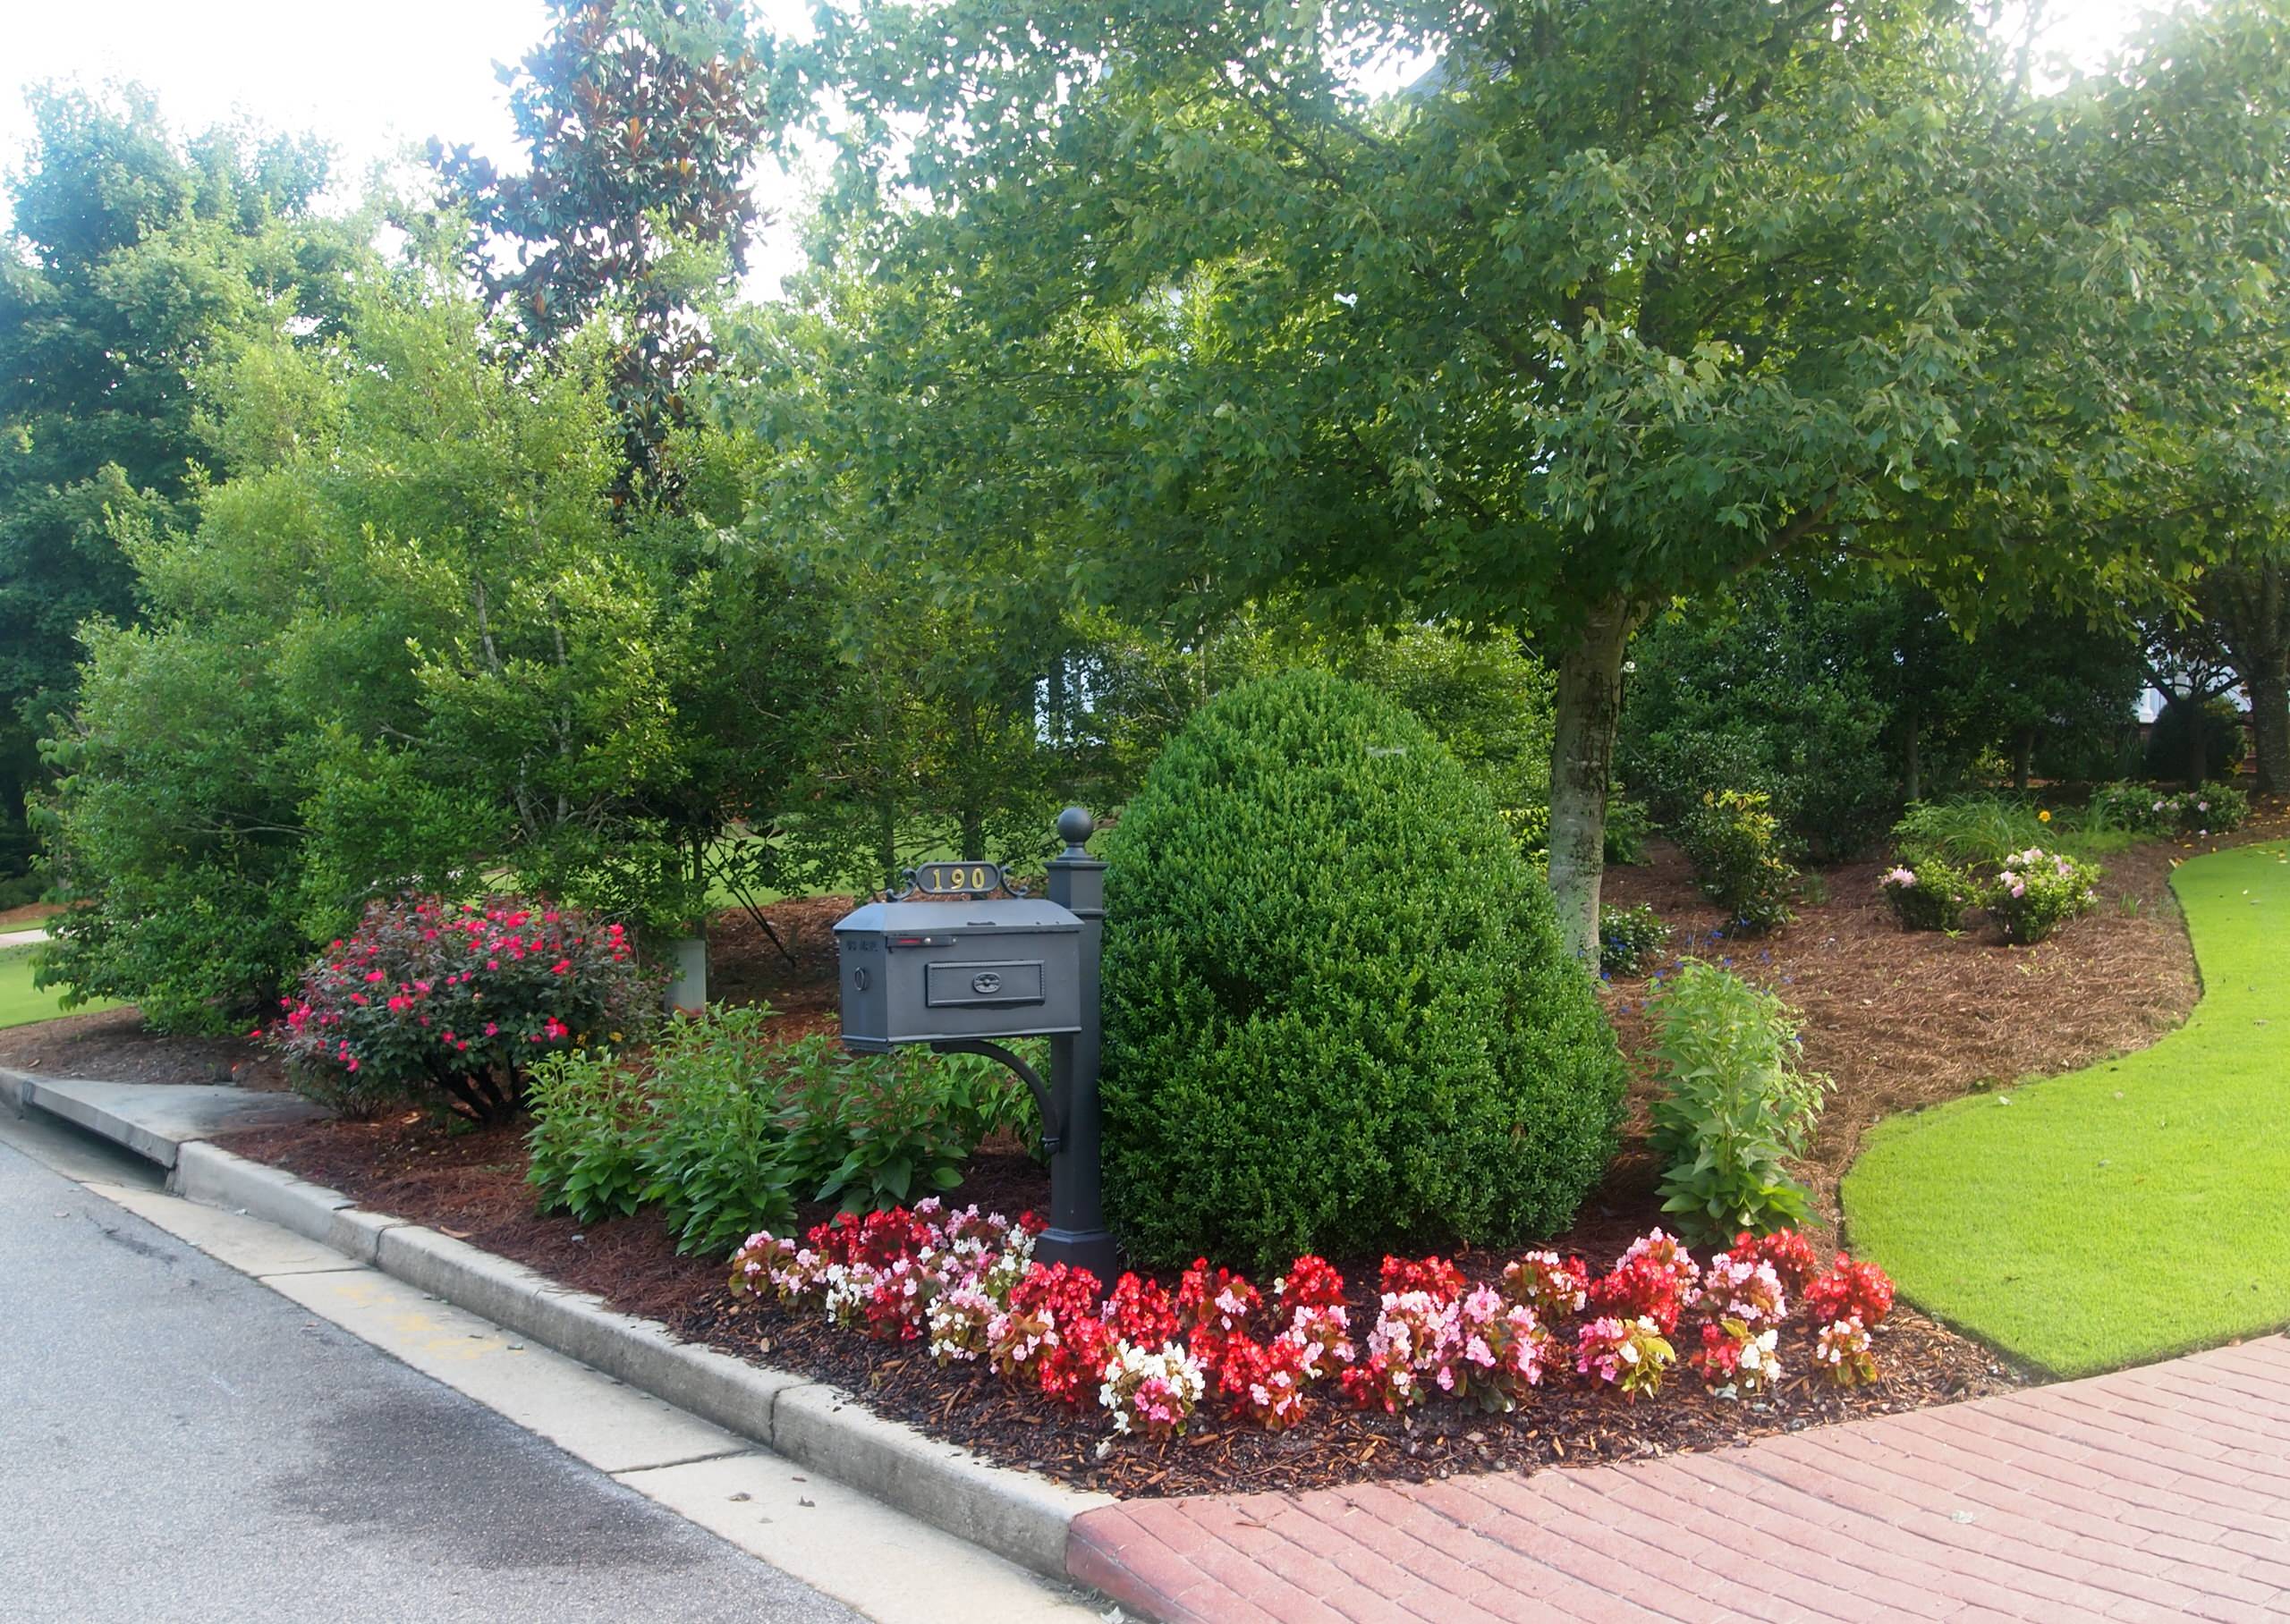 Boxwood Nias Knock Out Roses, Mailbox Landscaping Ideas